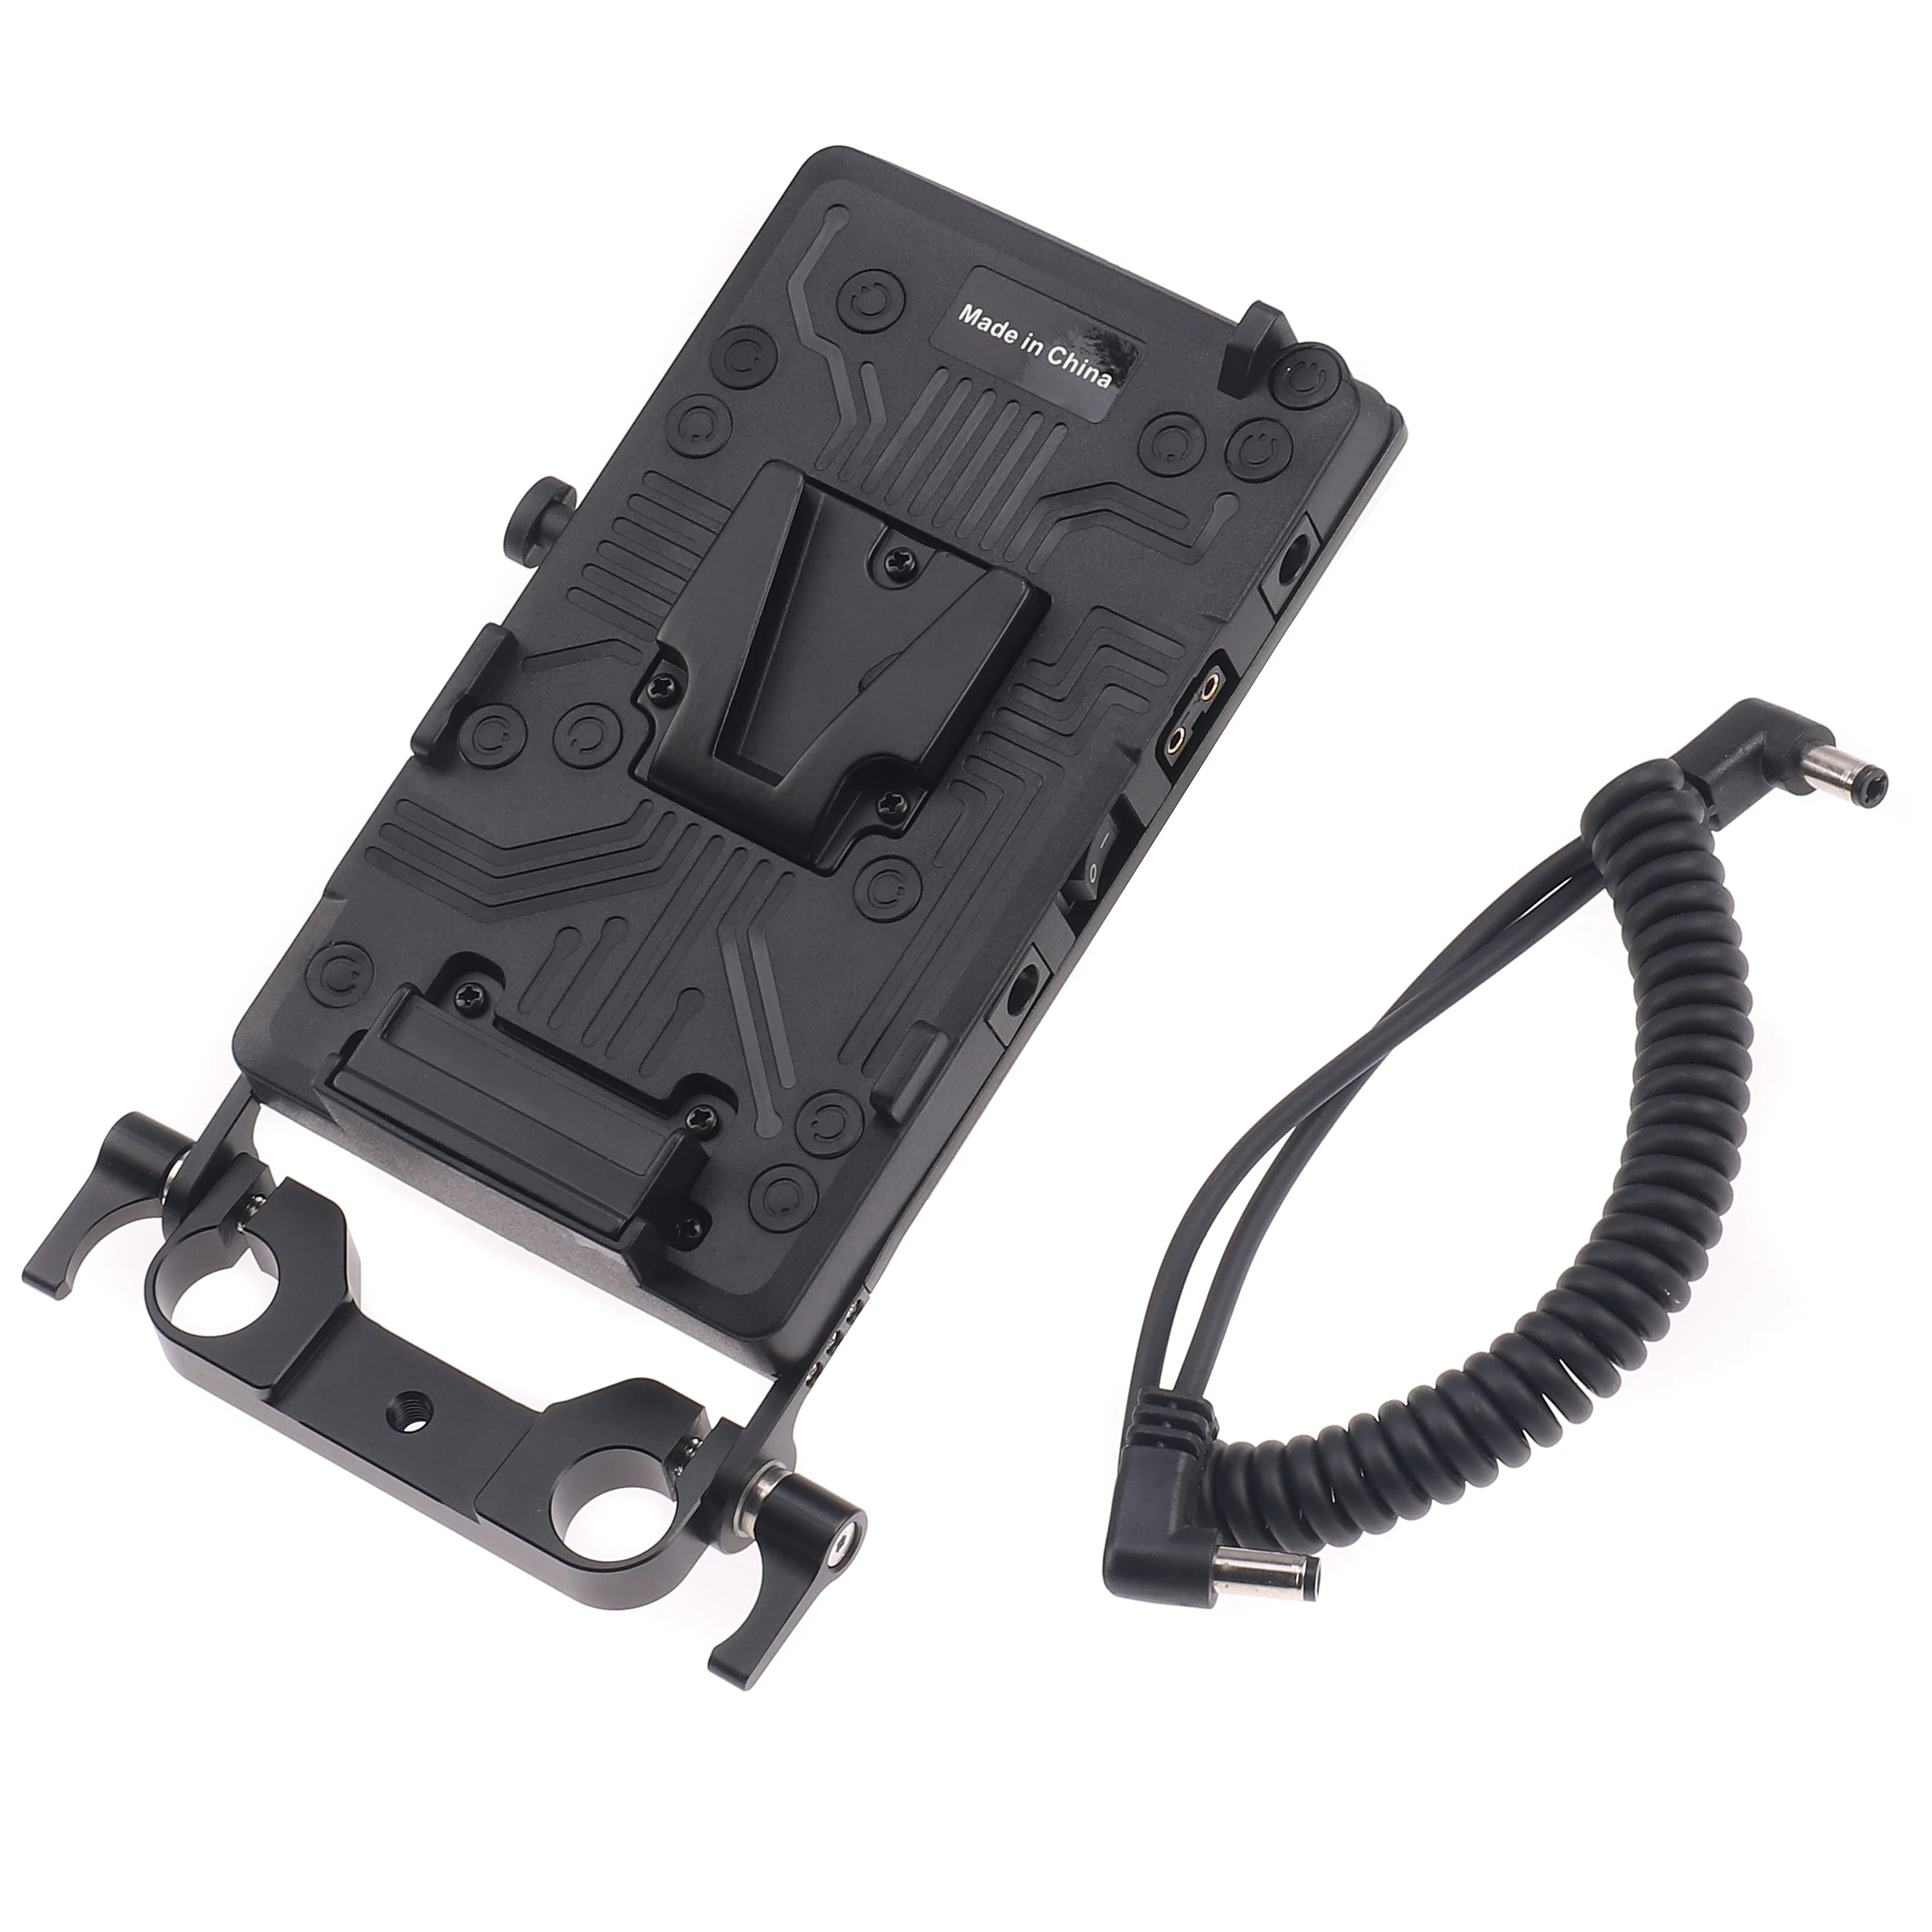 WY-VG1 Power Supply Systerm V-Mount Battery Plate Adapter D-tap Plate for Broadcast SLR HD Camera